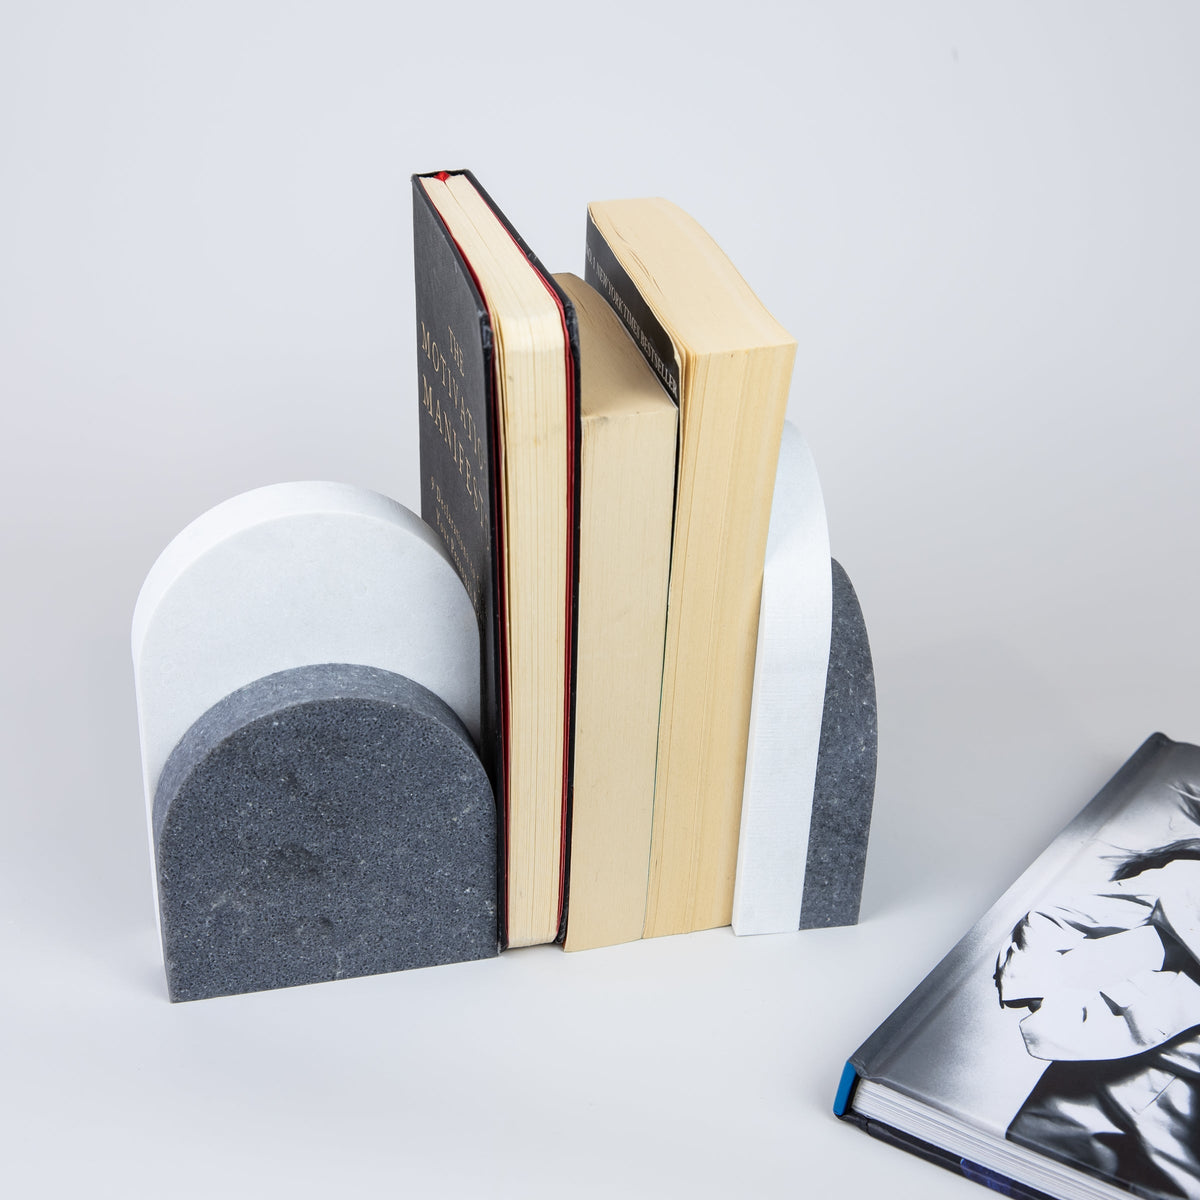 Quartz Bookend Set is 4cm thick. Styled with books. Available in Rugged Concrete partnered with Organic White by Caesarstone with dramatic gradients of robust greys, flashed with white-haze patinas and accentuated with industrial-inspired imperfections, meets a clean white surface with subtly blended undertones, reflecting a natural appearance that is effortlessly chic. The perfect addition to your home decor, similar to marble bookends.